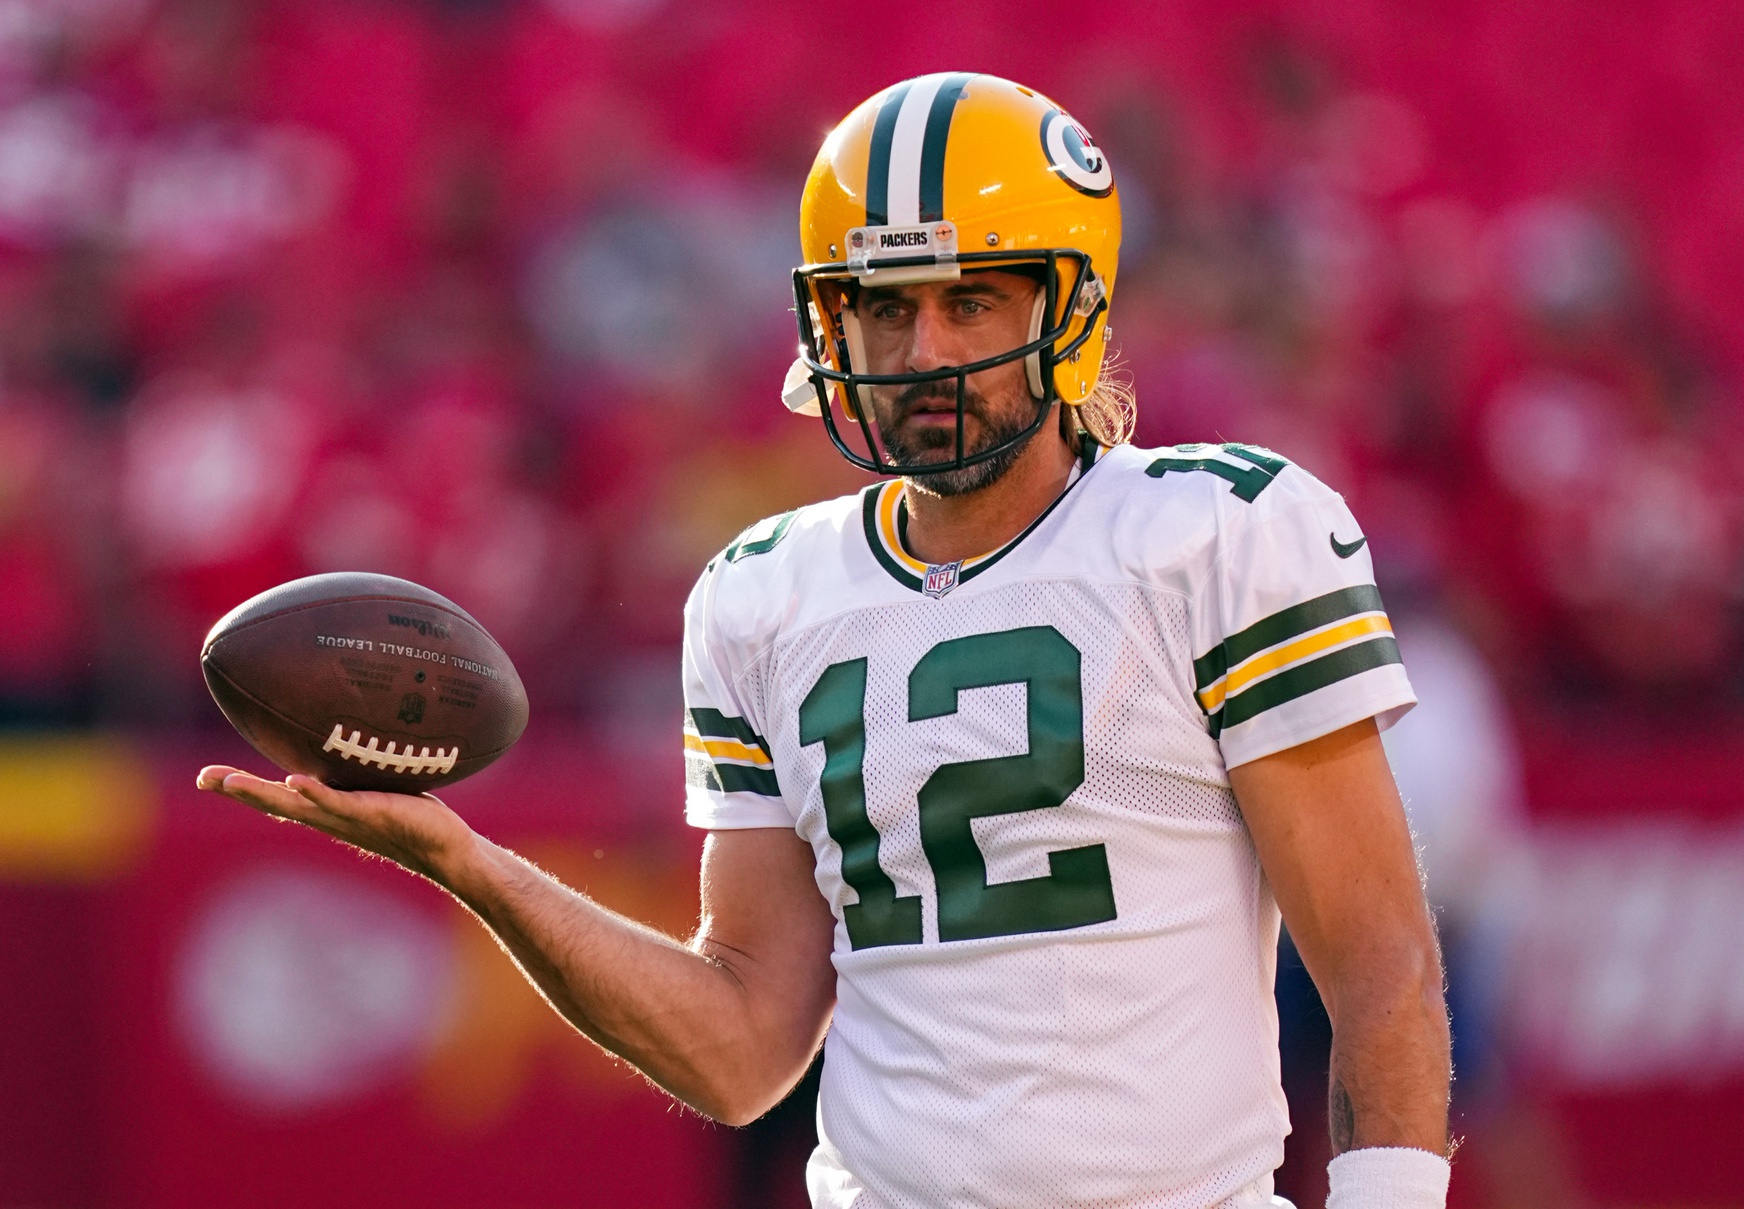 Should you select Aaron Rodgers in fantasy drafts?